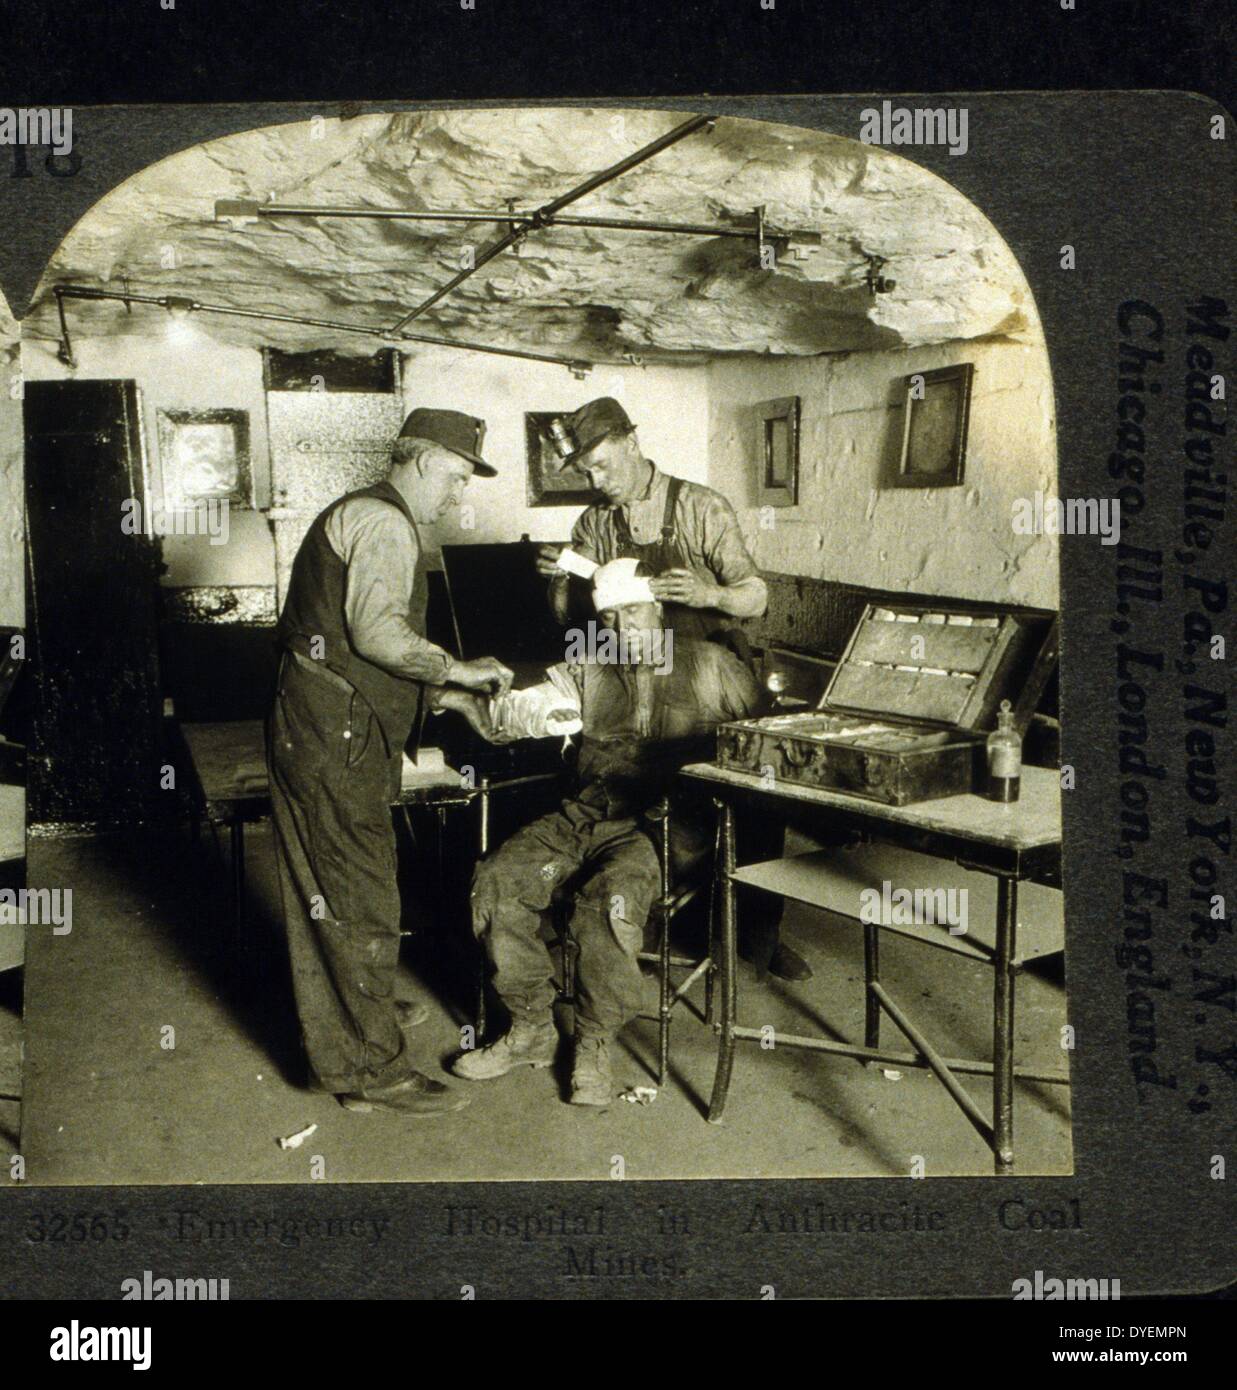 Emergency hospital in anthracite coal mines (between 1900 and 1920), photographic print on stereo card or stereograph. One man bandages head of injured man while another bandages his arm. Stock Photo